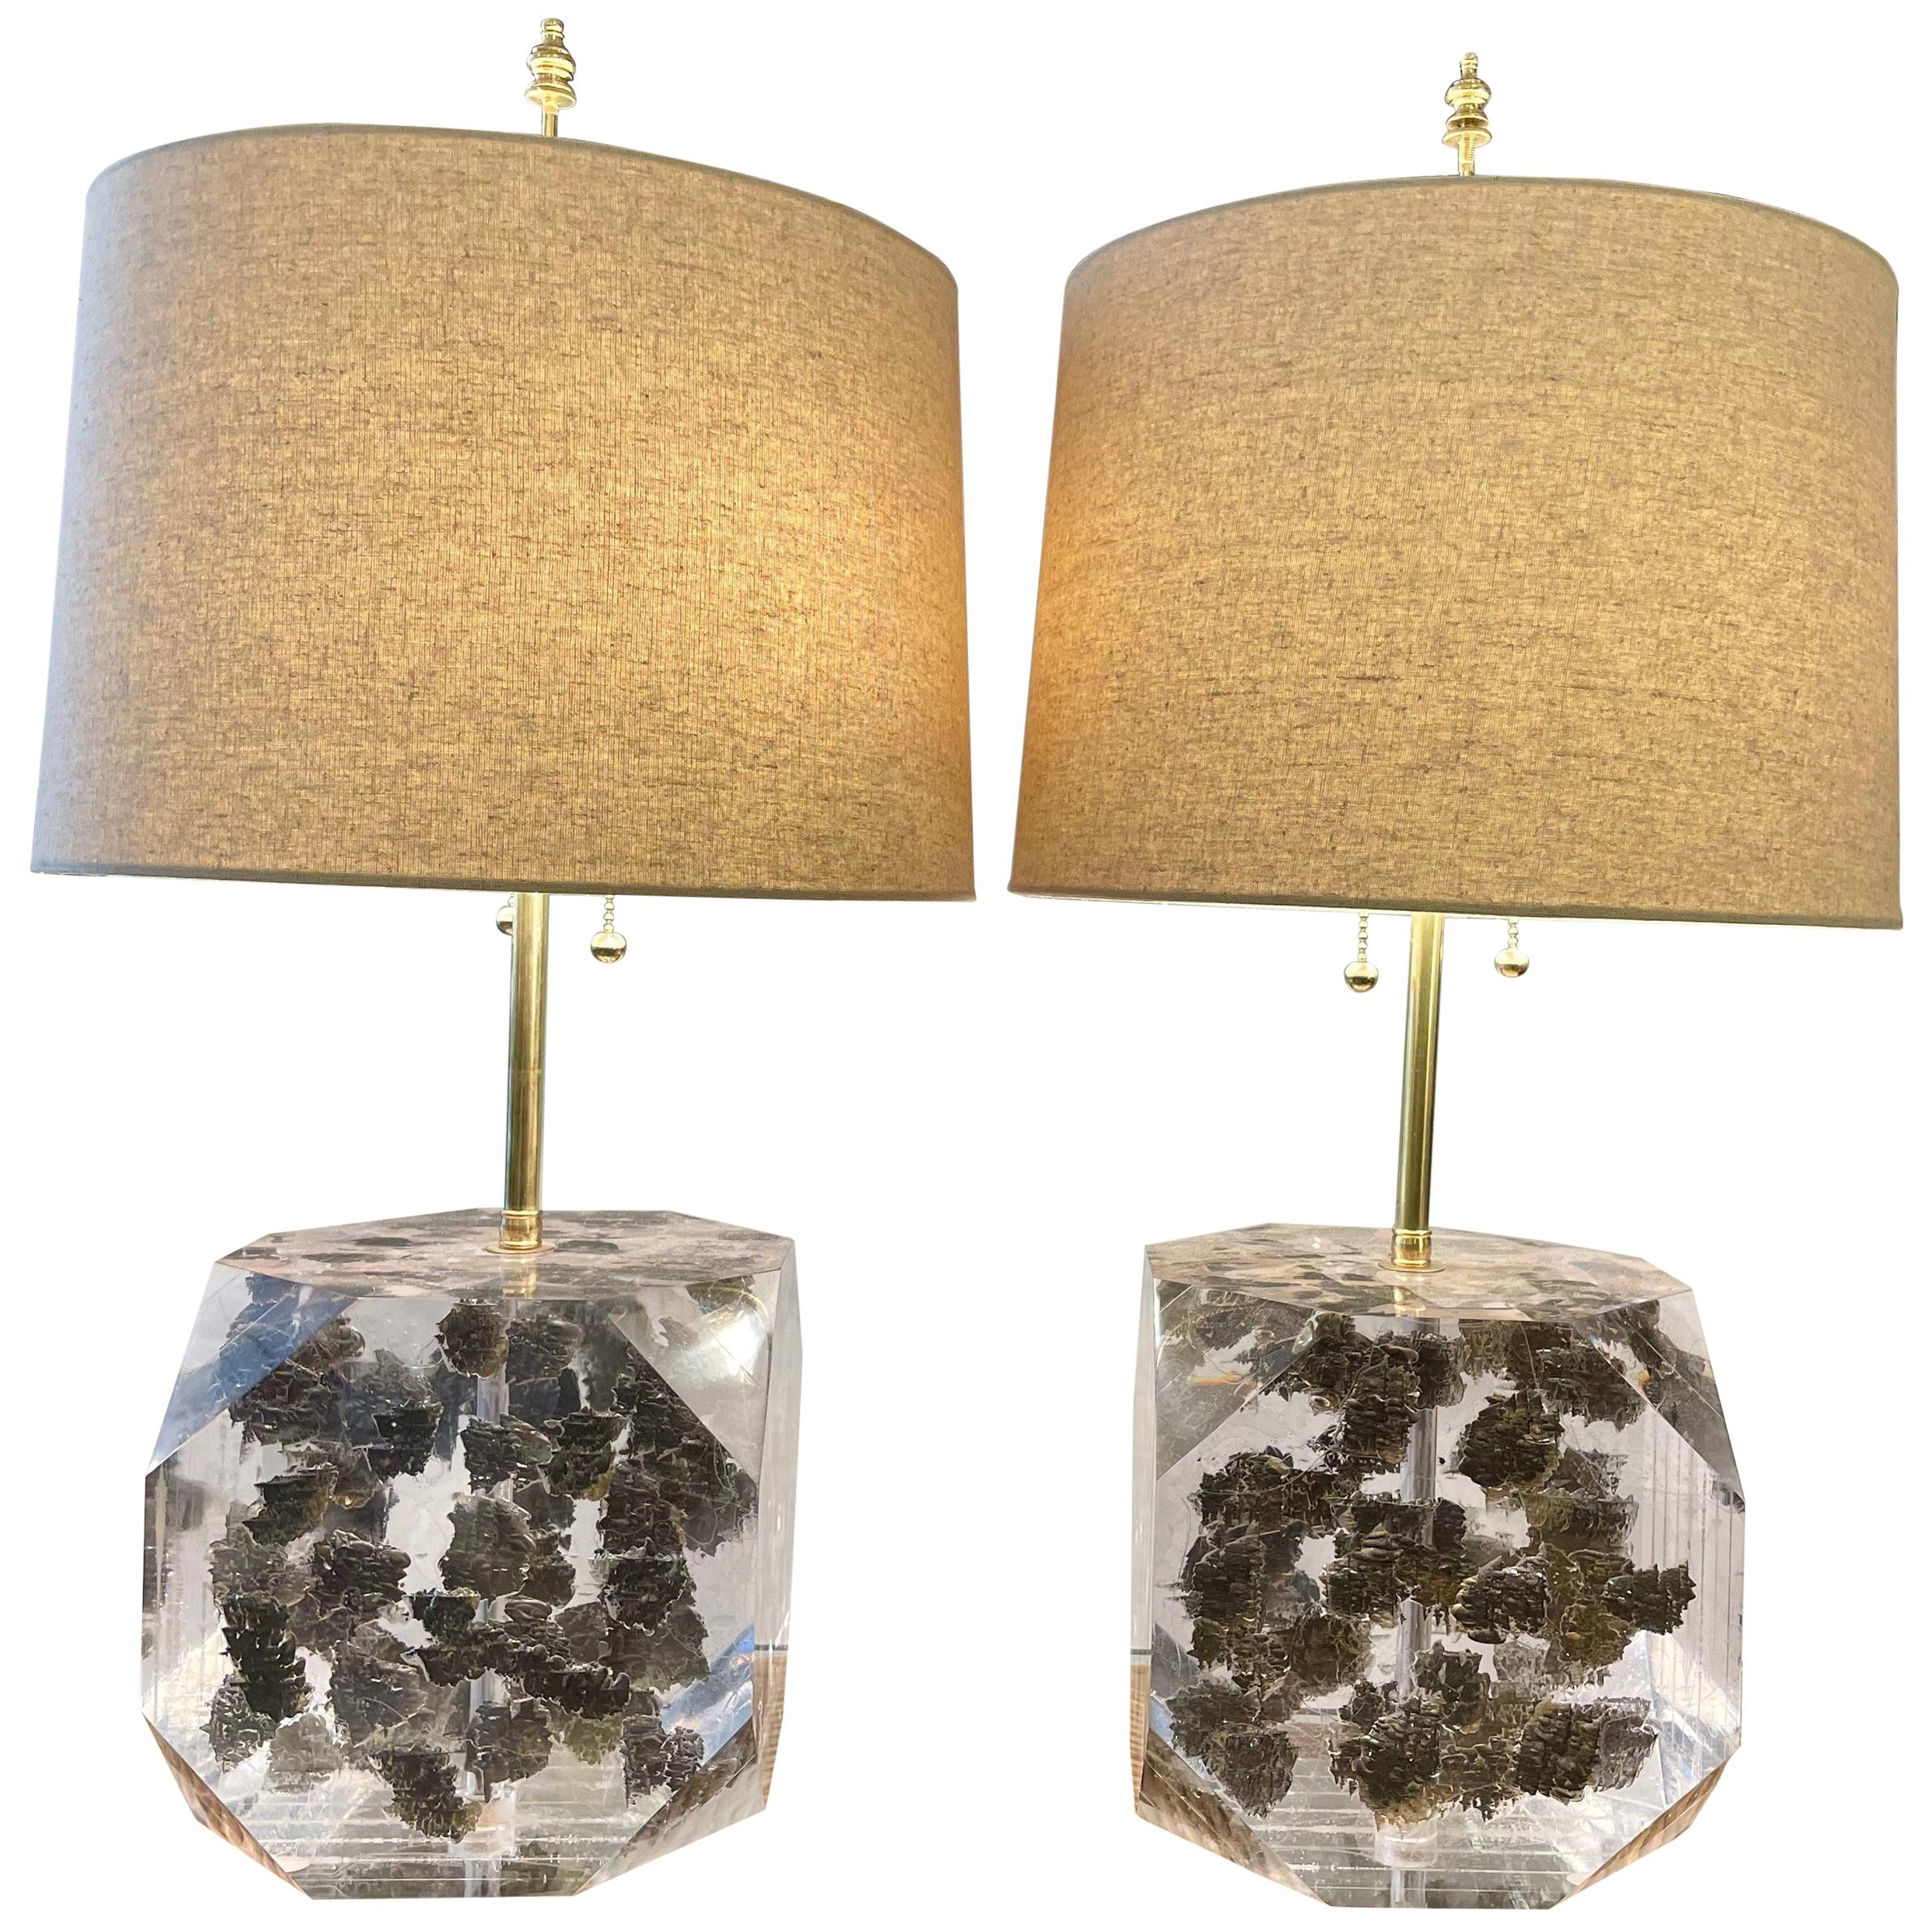 Lucite Layered Hexagonal Block Lamps, Pair by Freda Koblick For Sale